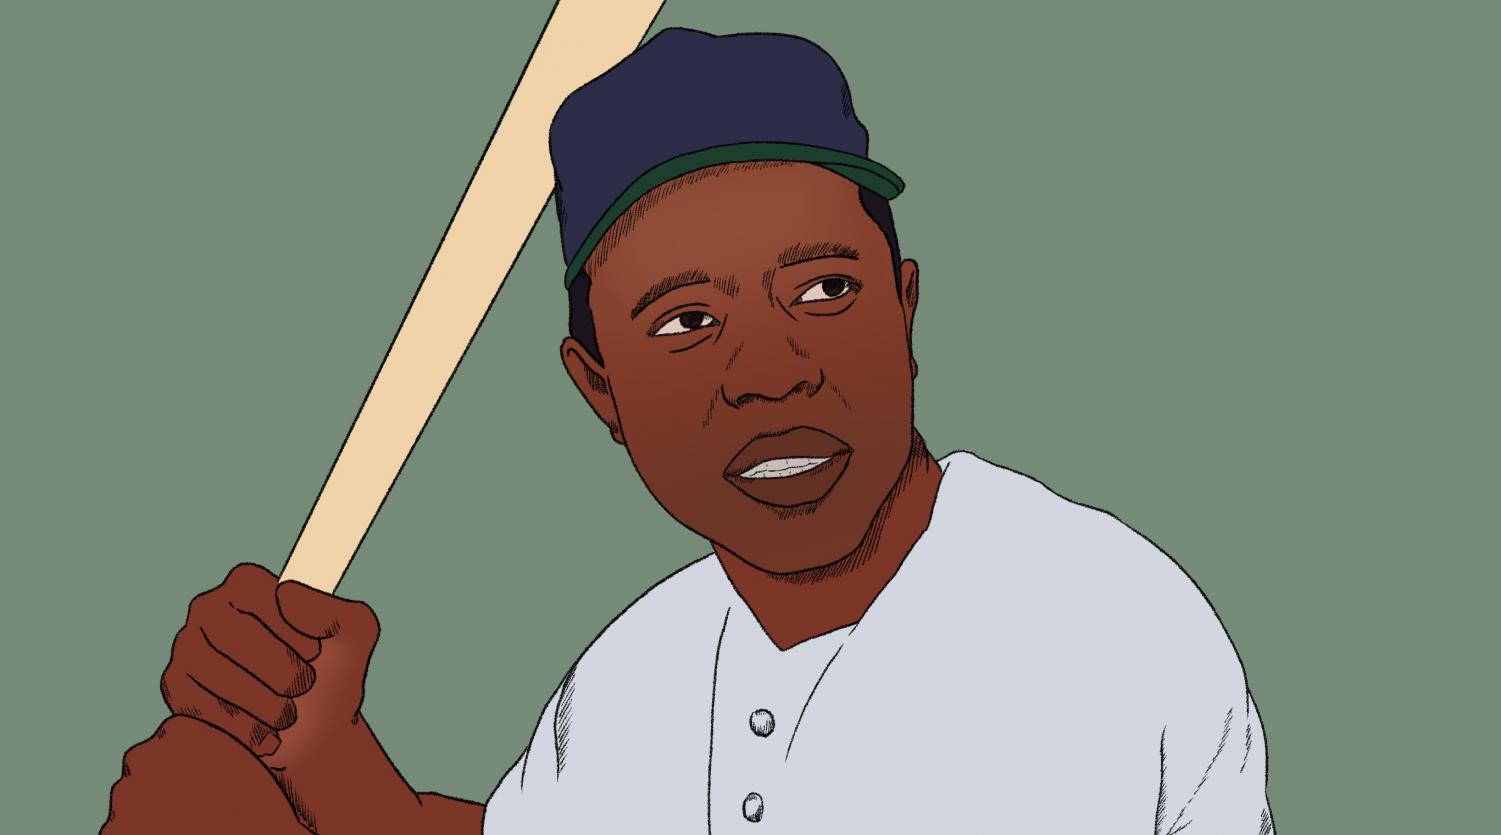 Affable Hank Aaron reminds us what is important: Family